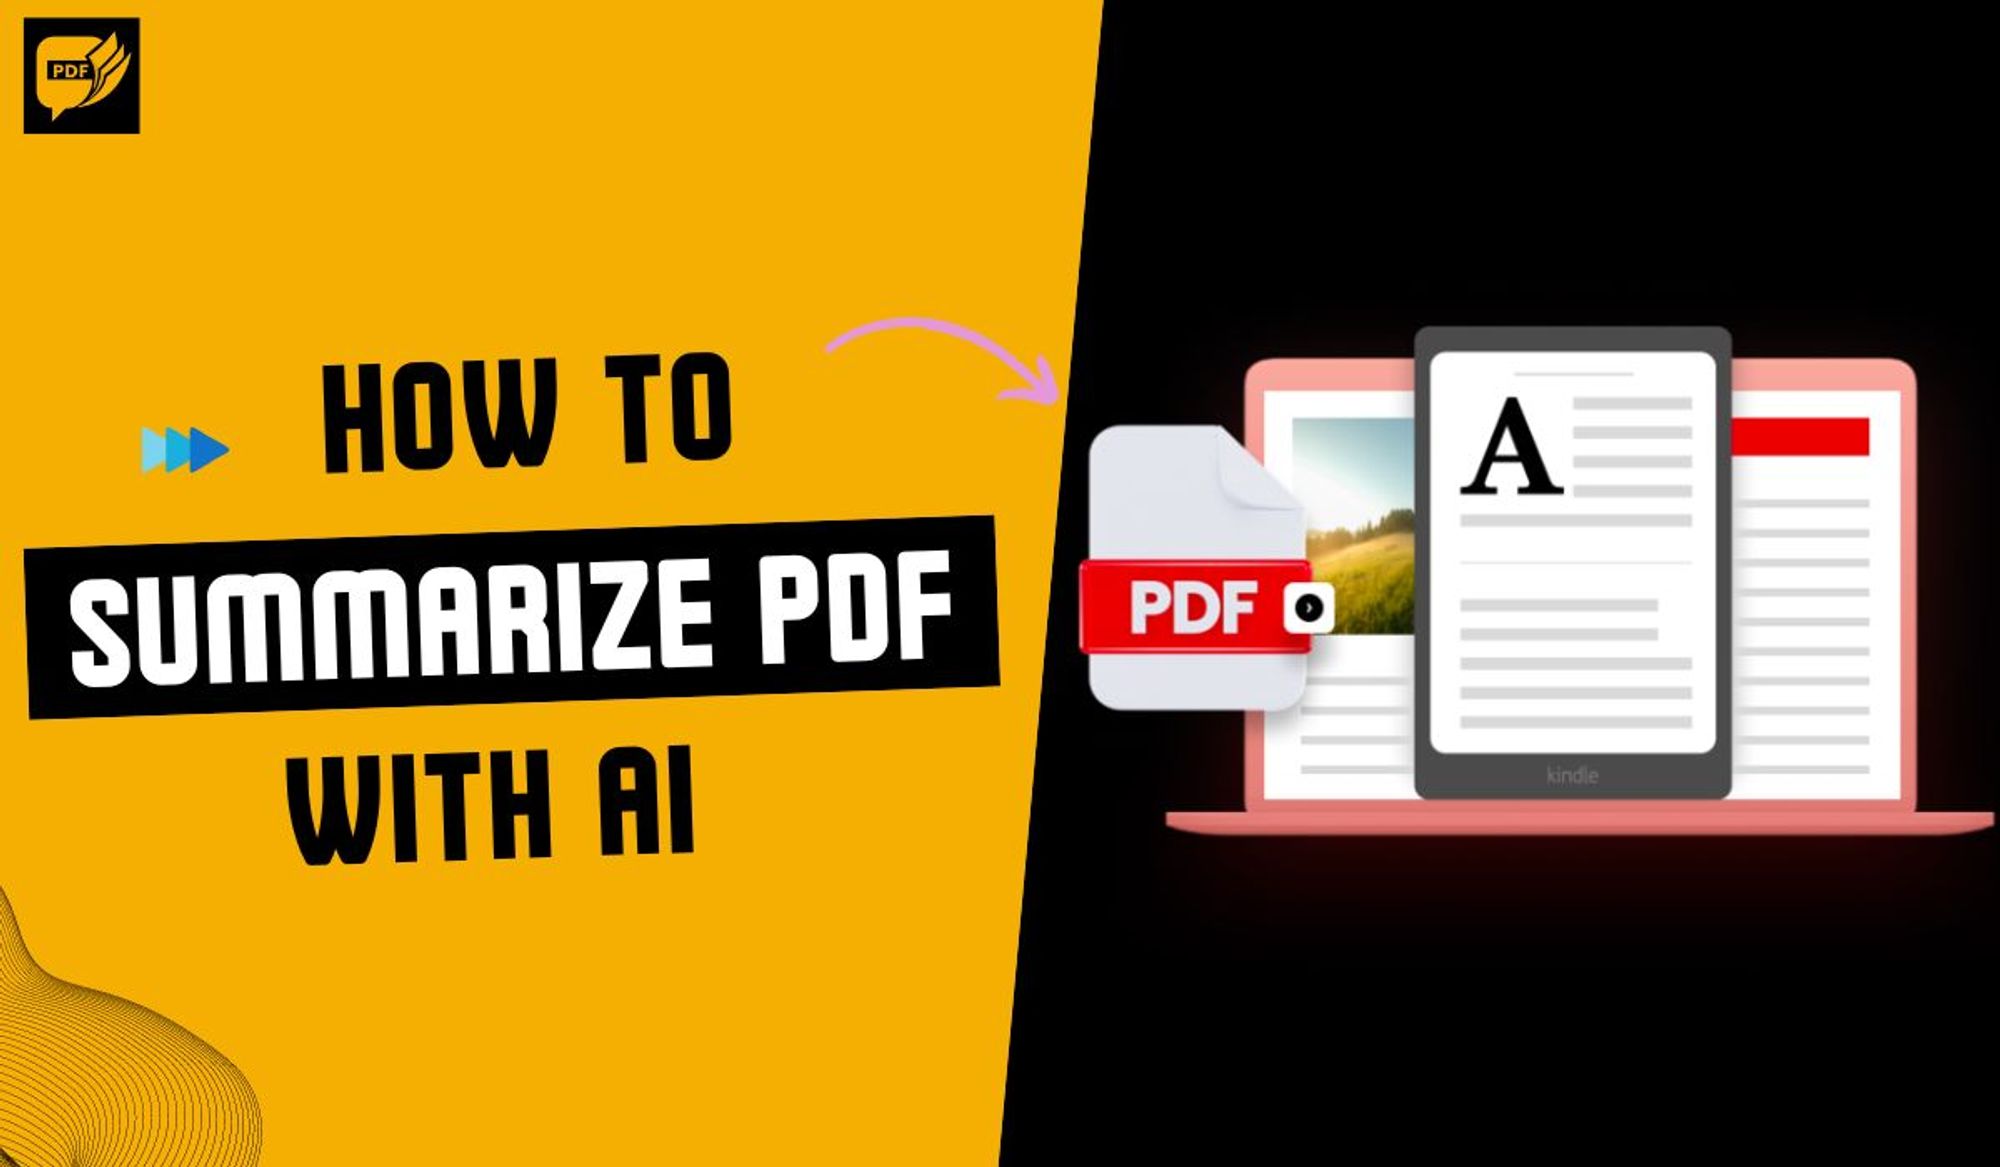 PDF) An Efficient, Cost Effective and User Friendly Approach for